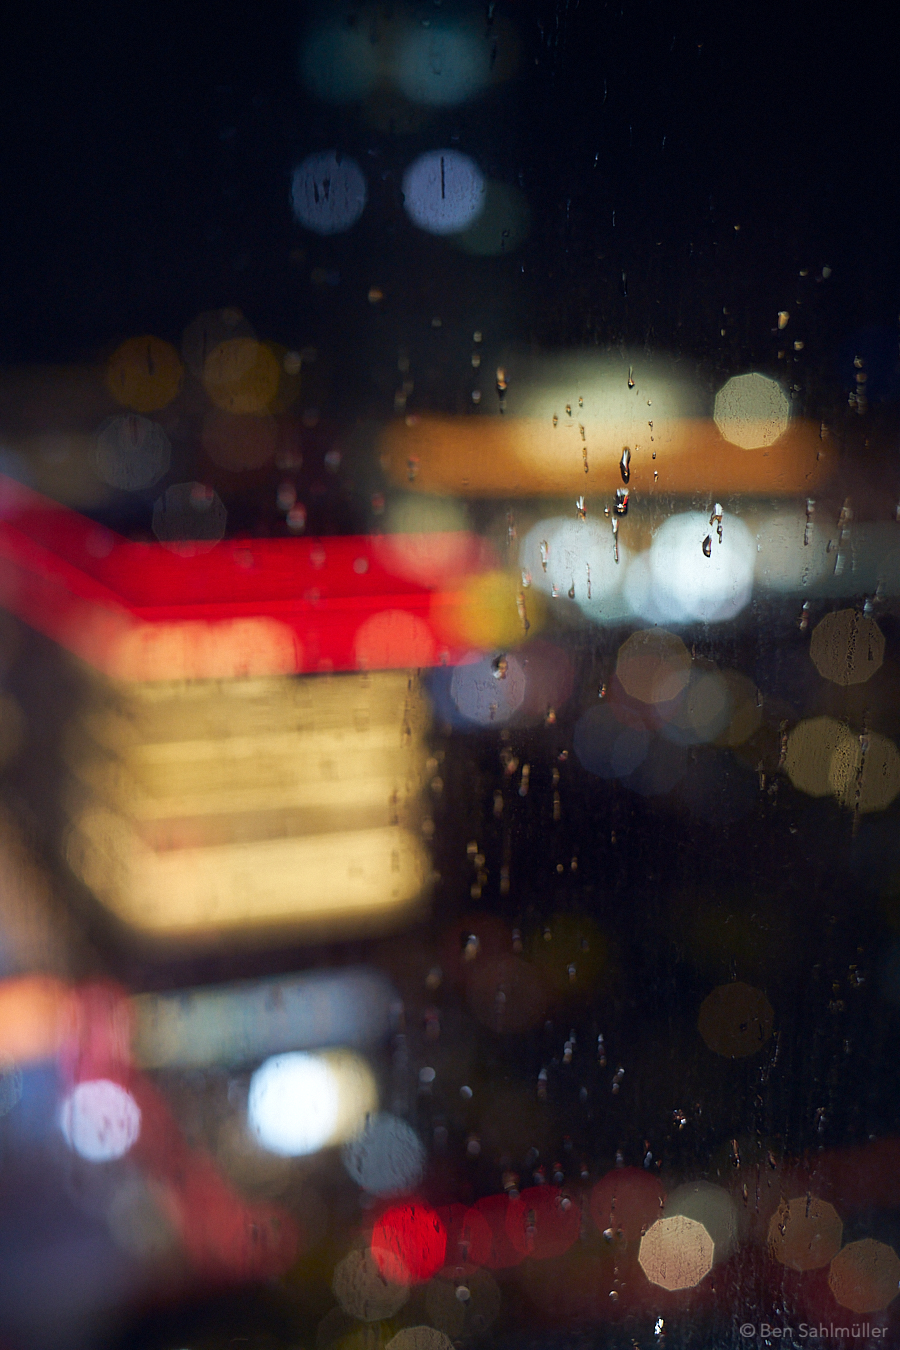 A few raindrops on a window by night, behind it the shape of a building can only be adumbrated by its shimmering lights in the window.